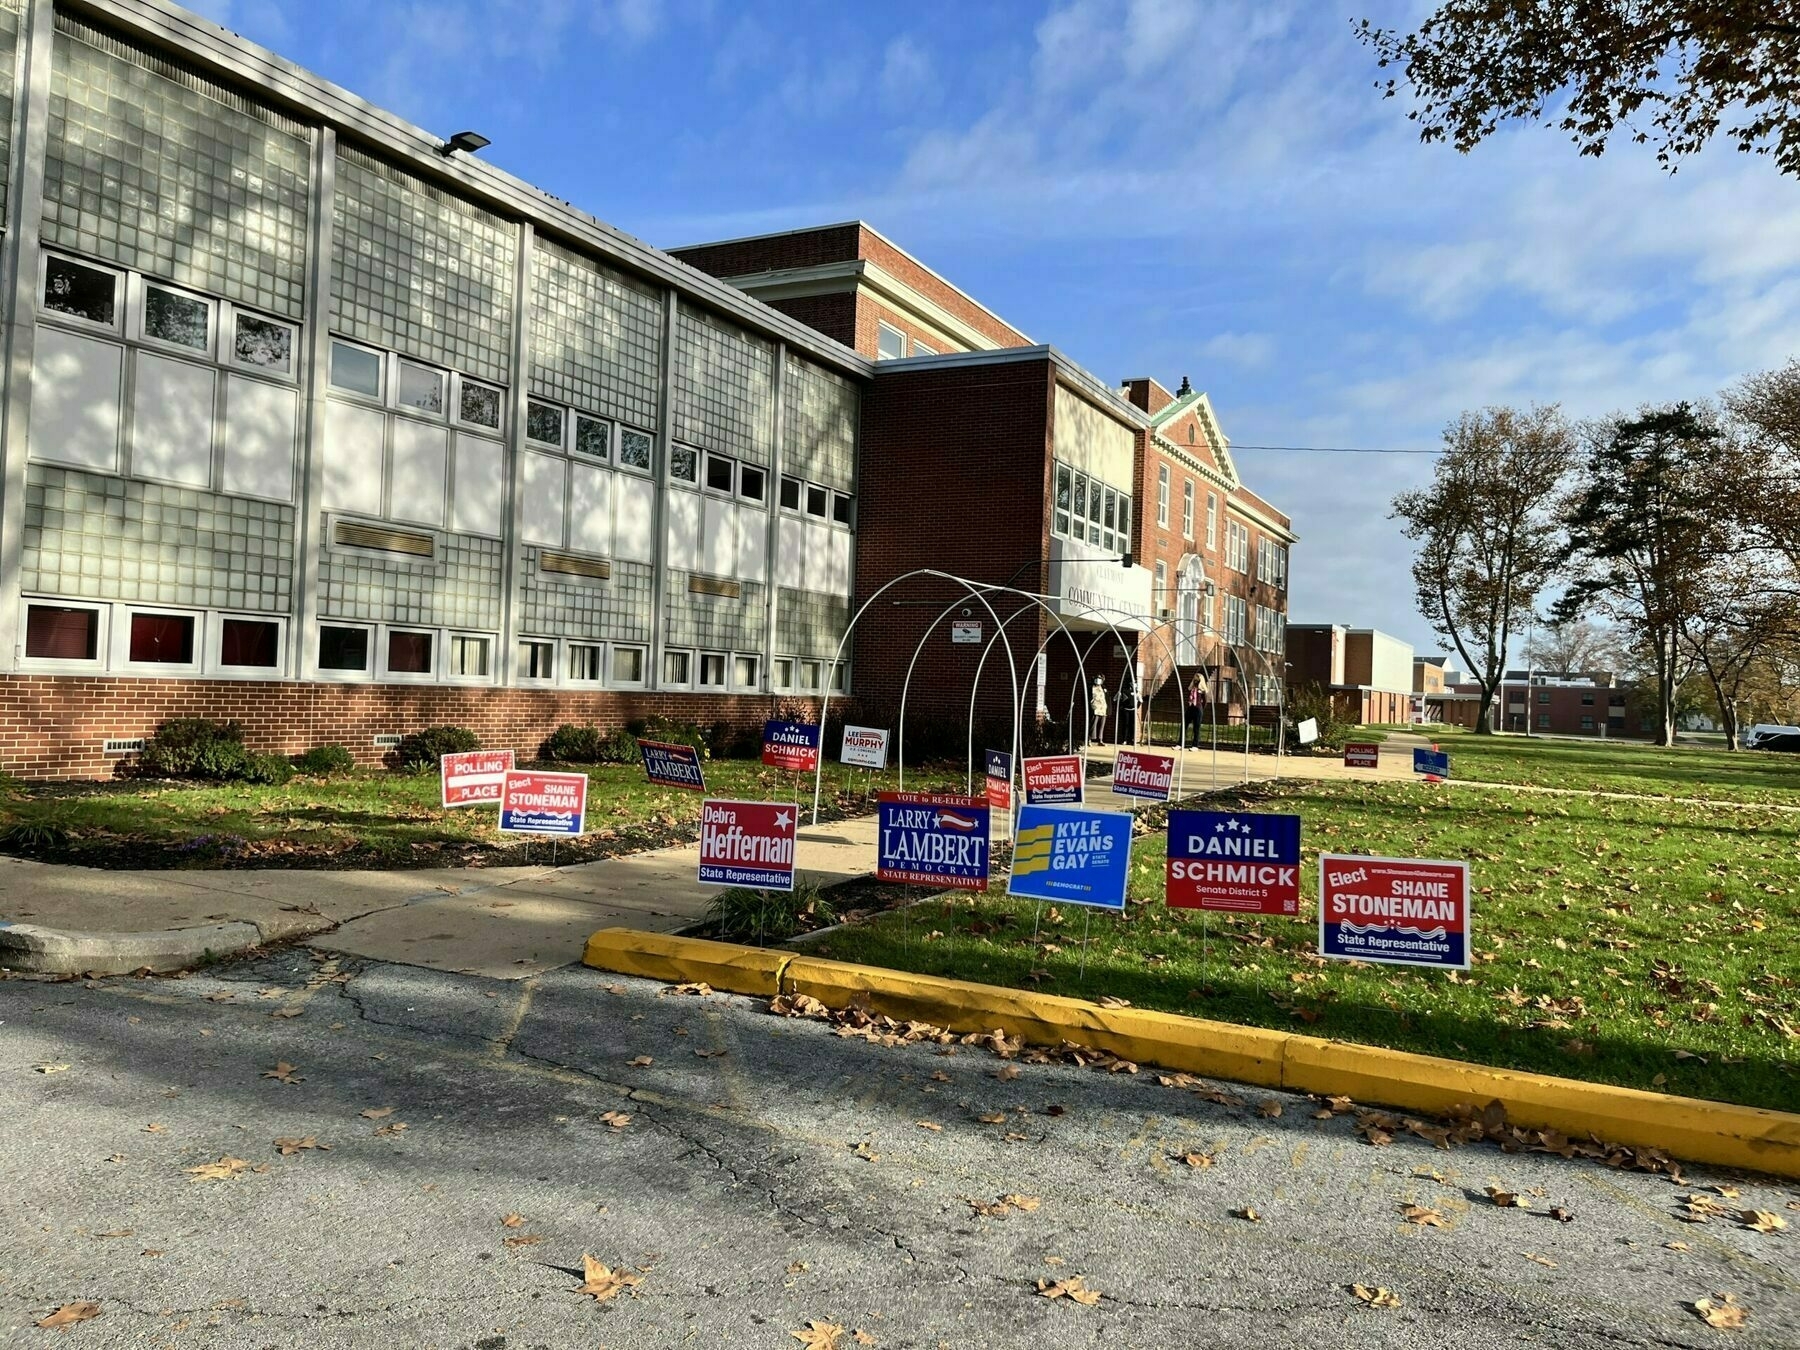 The exterior of the Claymont Community Center this morning. Weather is beautiful and sunny. Many signs for candidates out front.